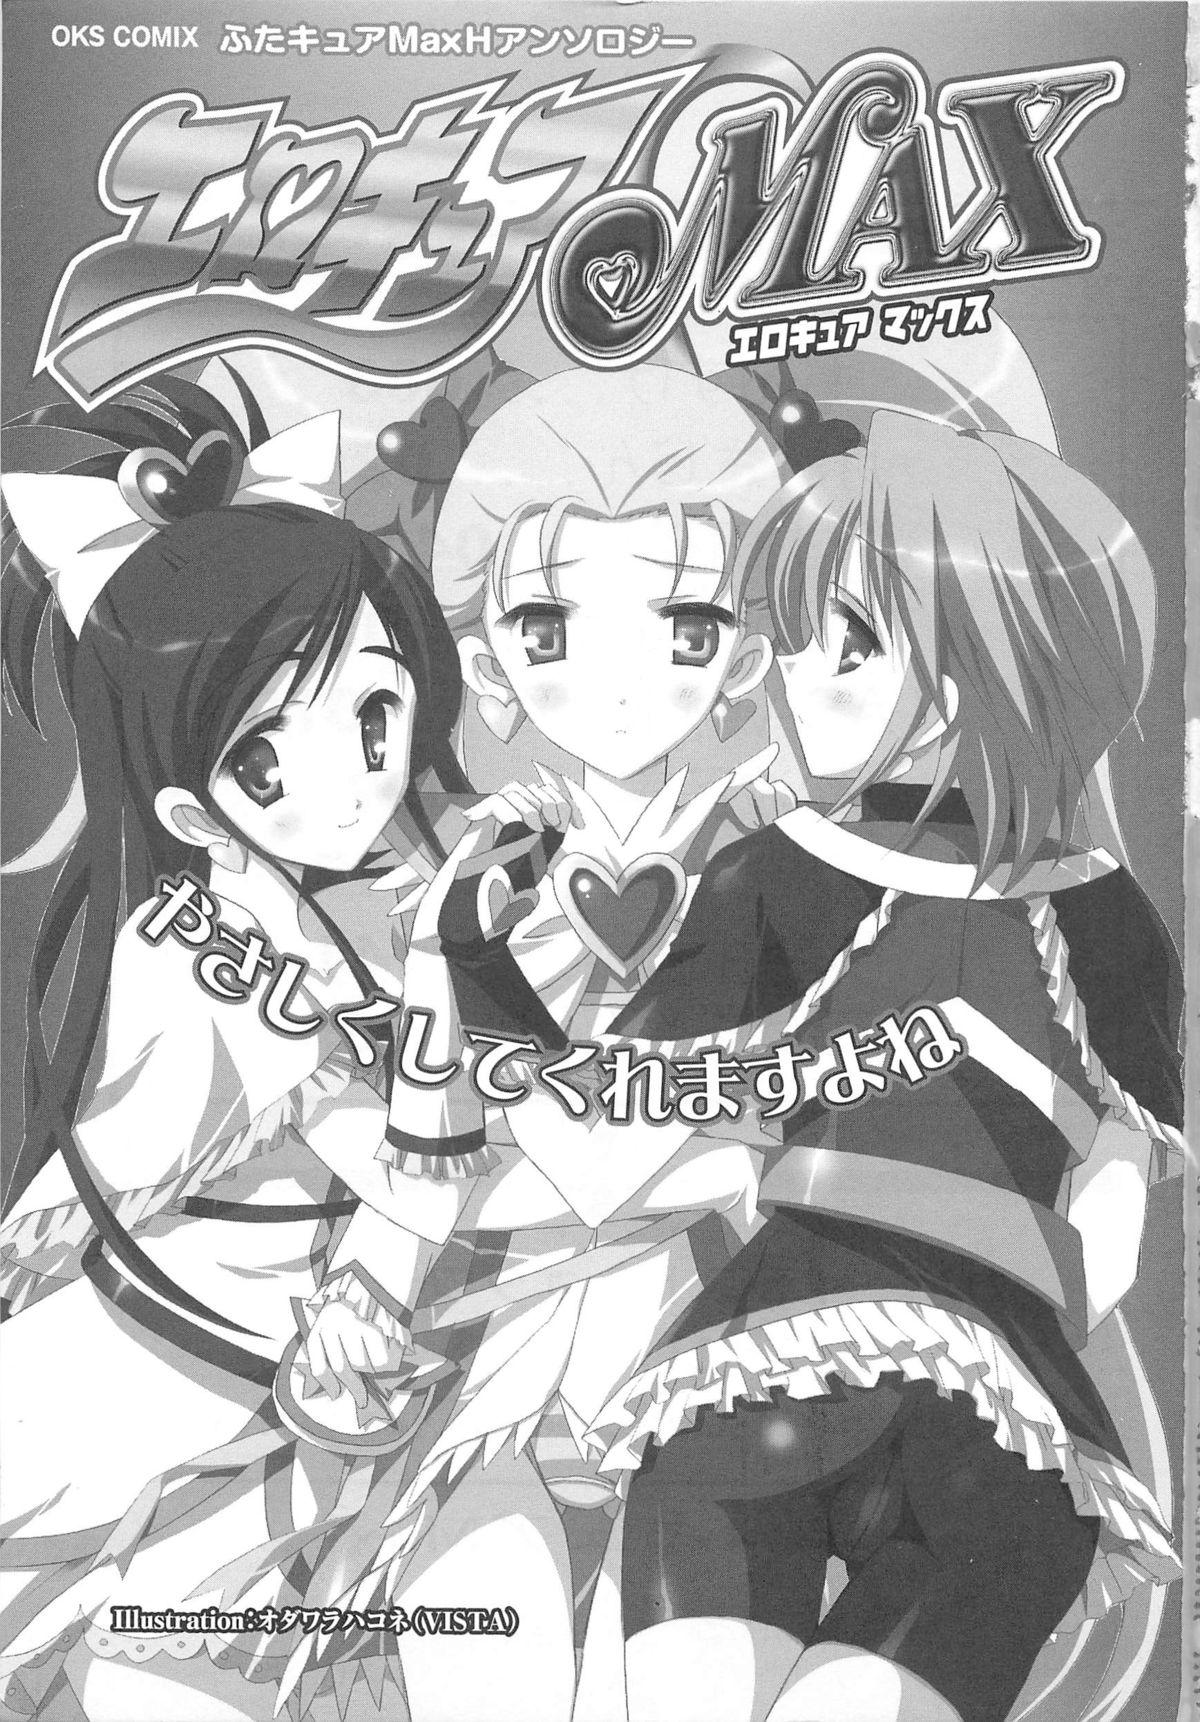 First Time Erocure MAX - Futacure Max H - Pretty cure Thylinh - Page 4